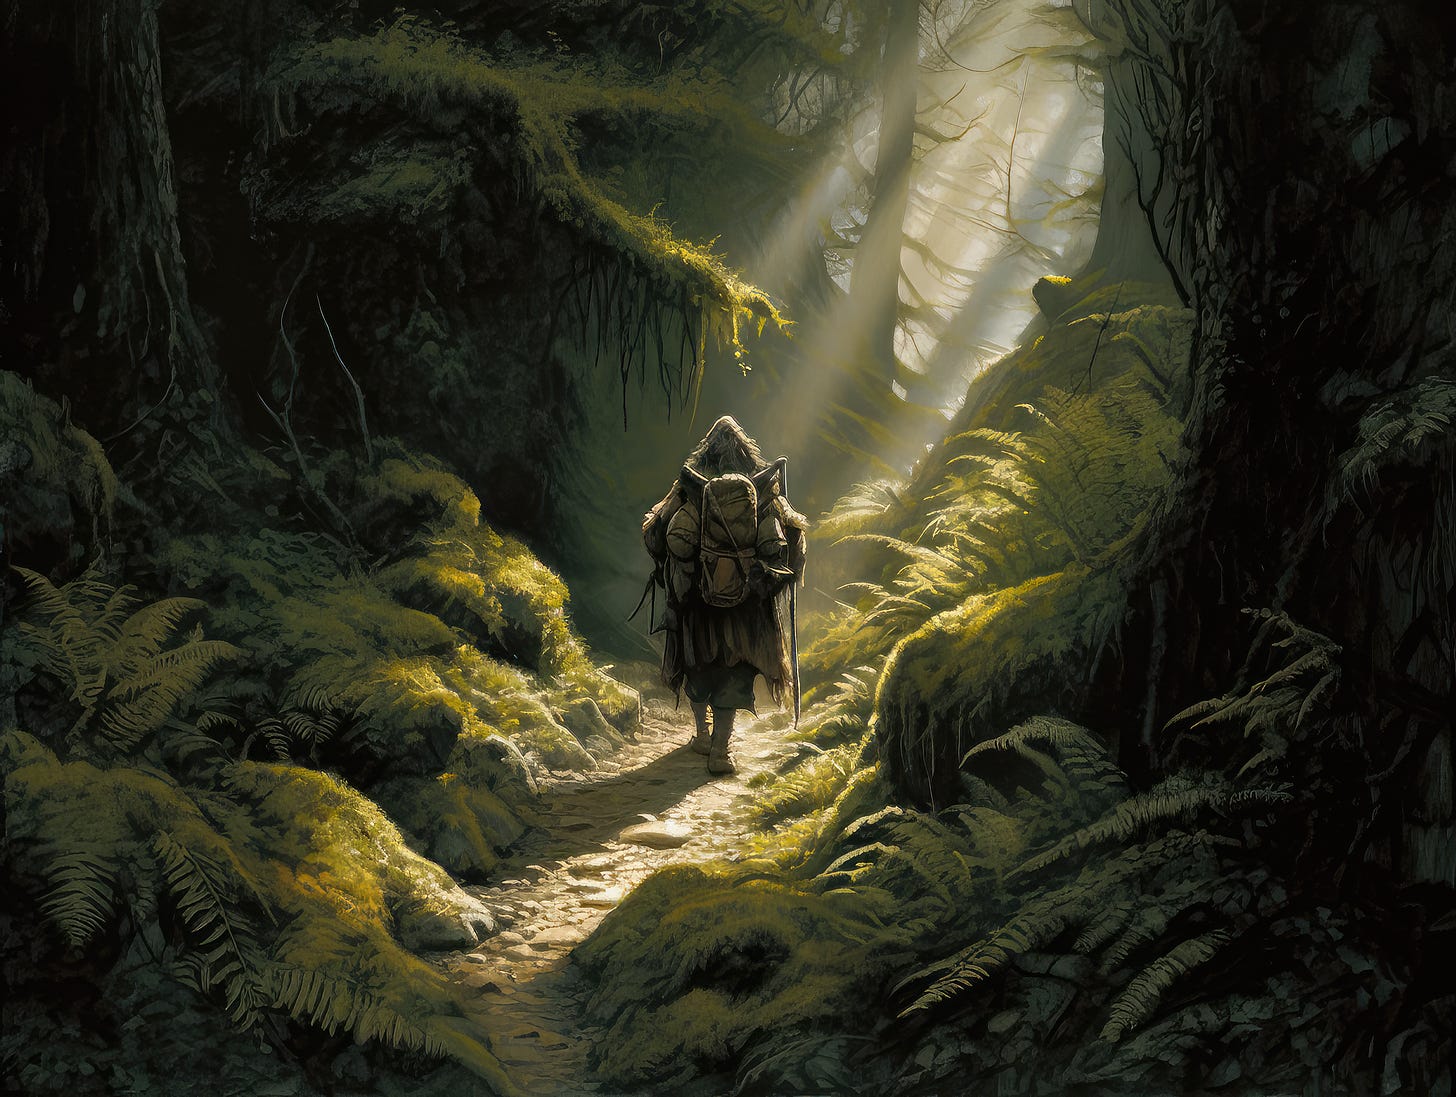 A pathfinder walking through the dark woods being guided by rays of sunlight that peek through the forest canopy